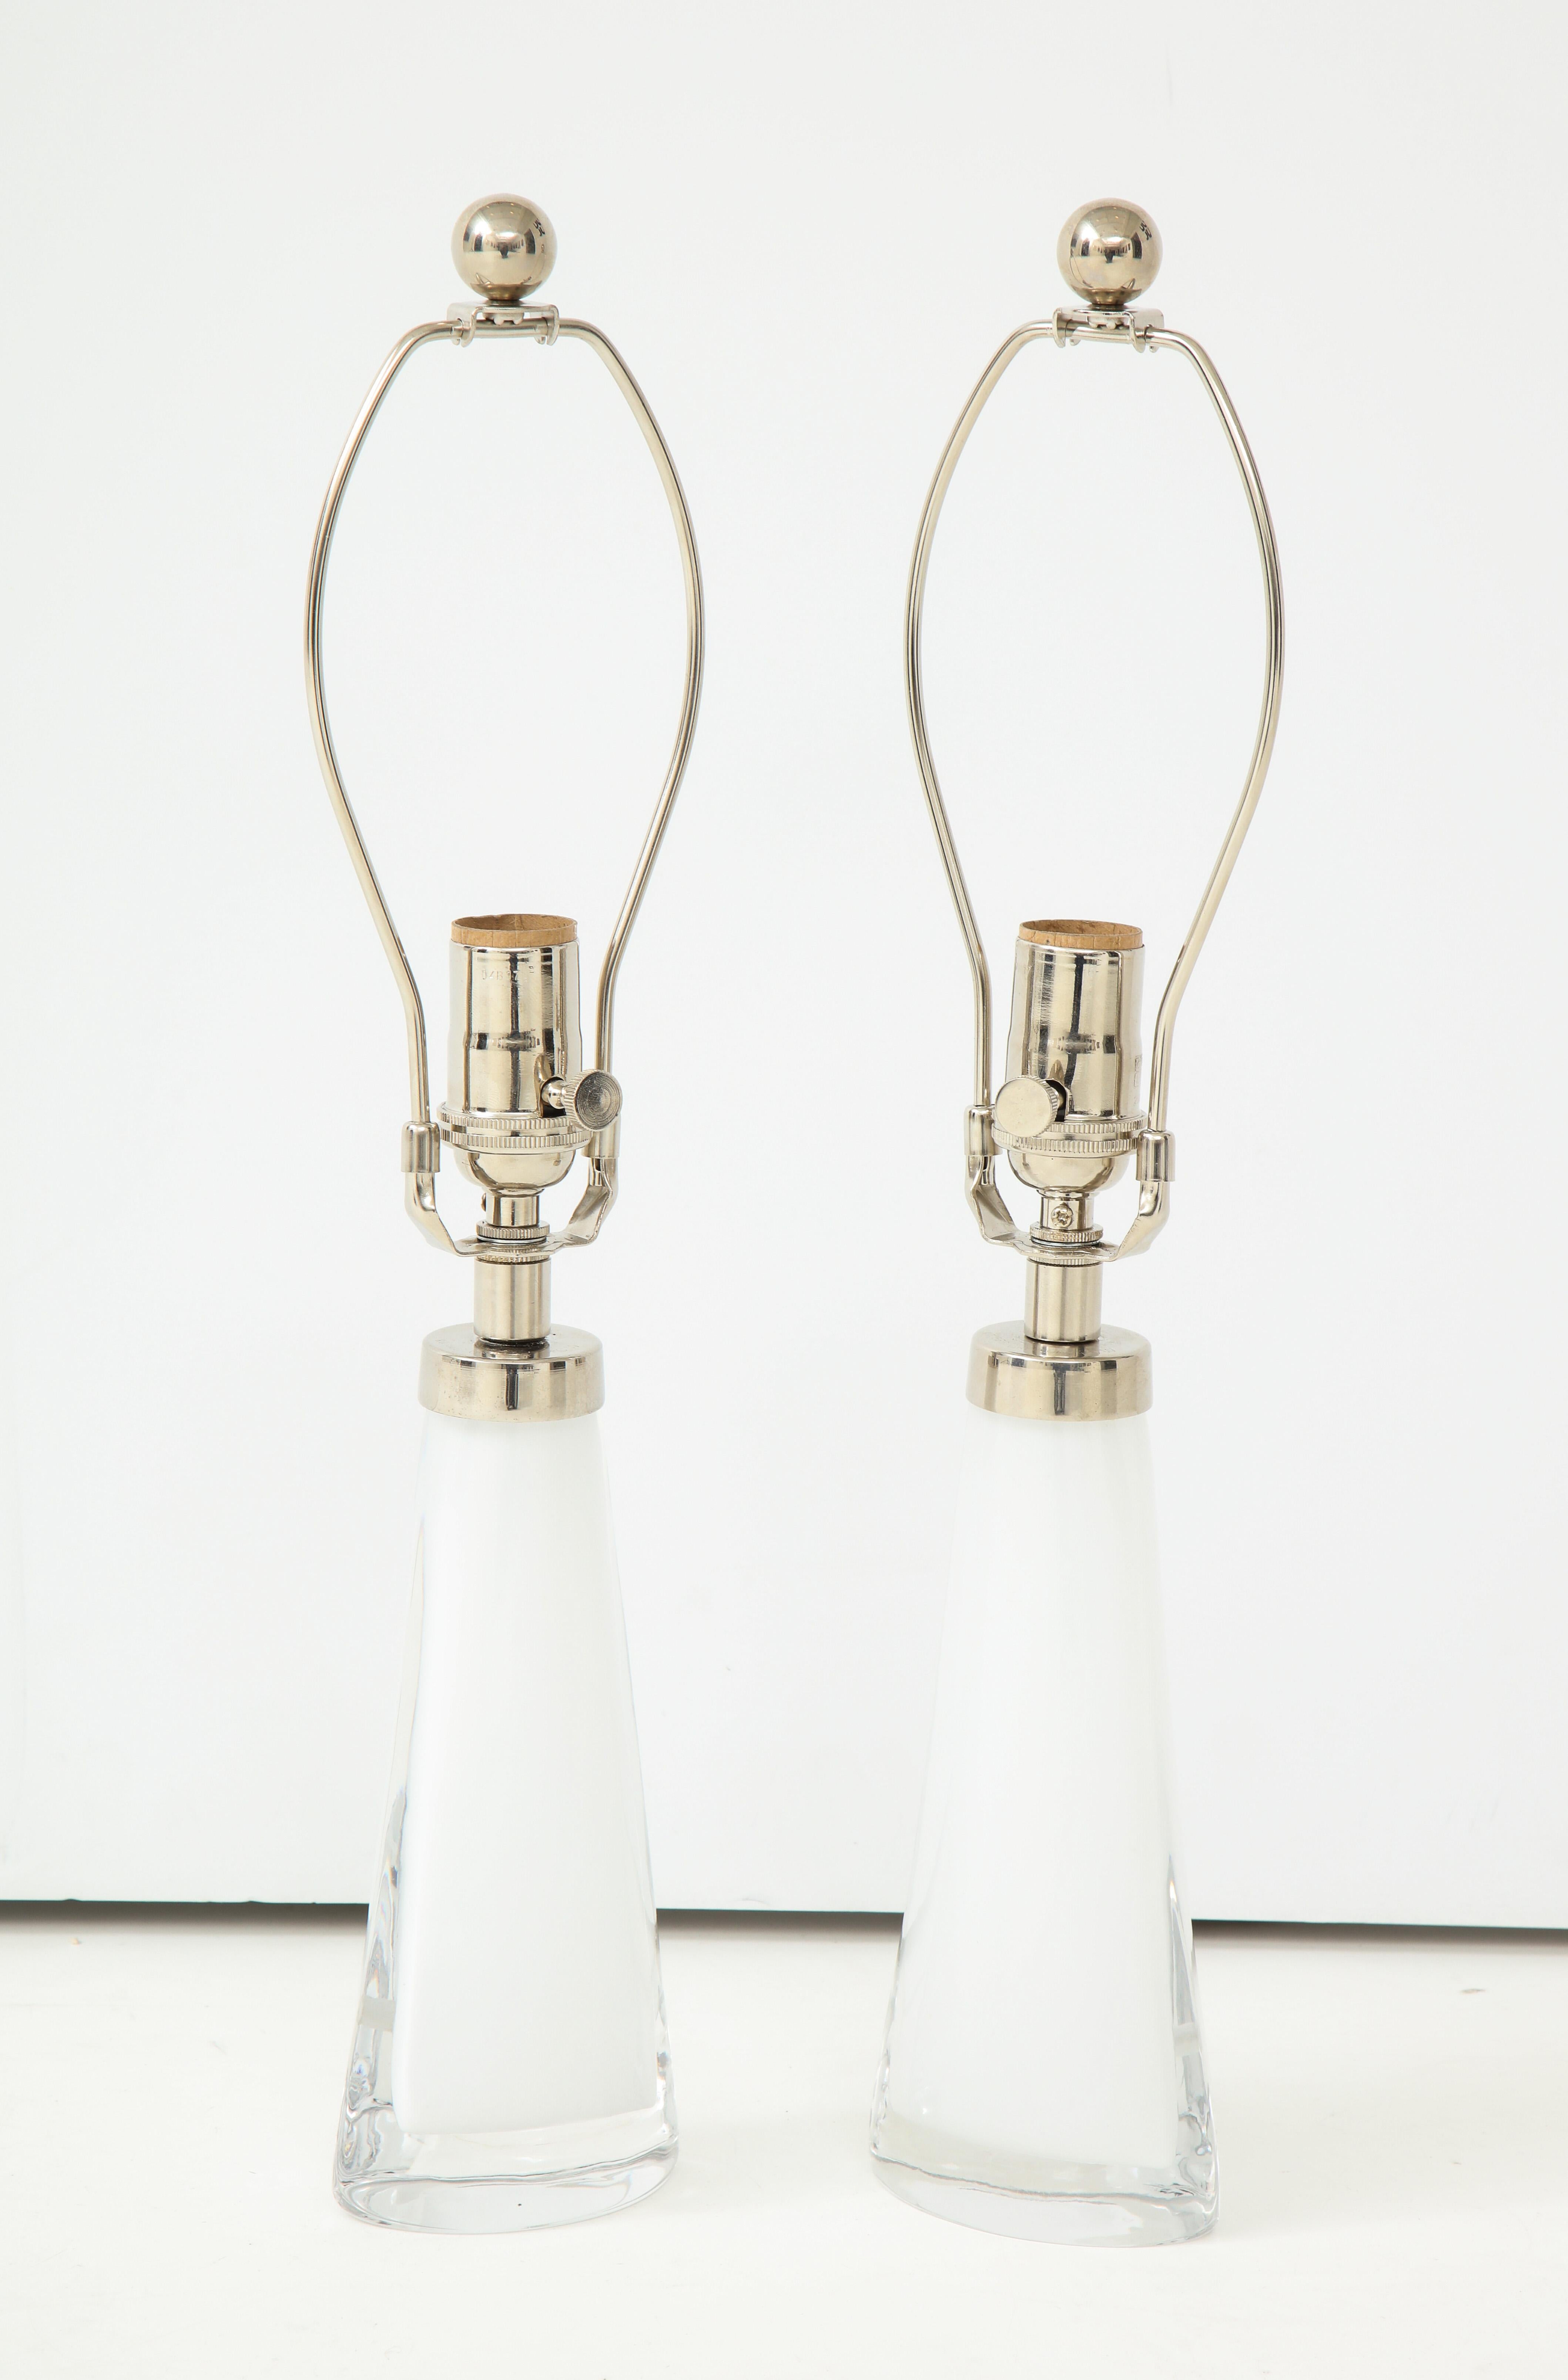 Pair of white crystal lamps by Carl Fagerlund for Orrefors.
The lamps have polished nickel hardware and they have been newly rewired for the US.
Measures: The height to the top of the glass is 9